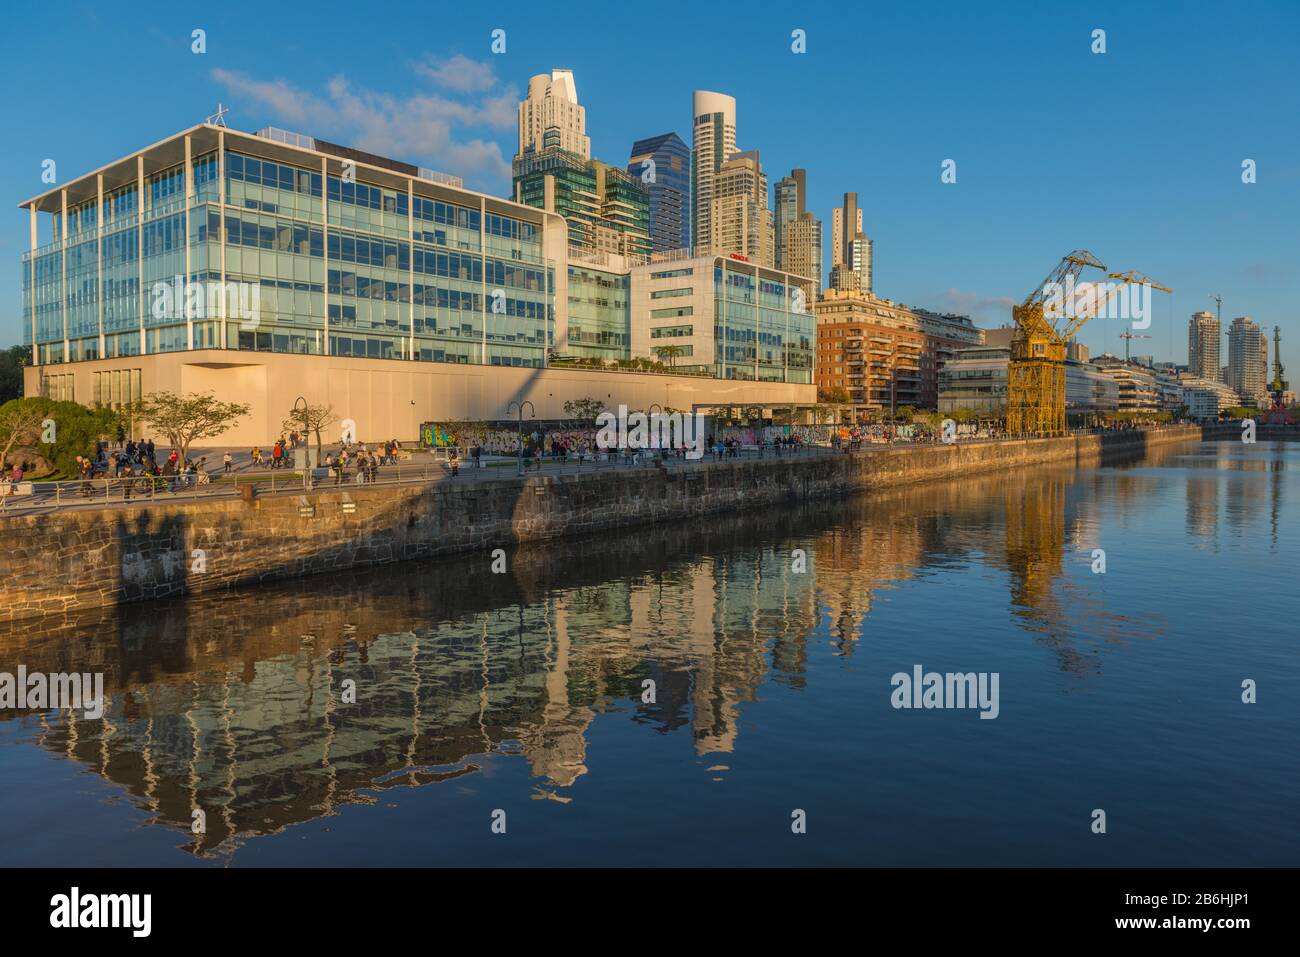 Puerto Madero, new port city with international architecture, Buenos Aires, Argentina Stock Photo